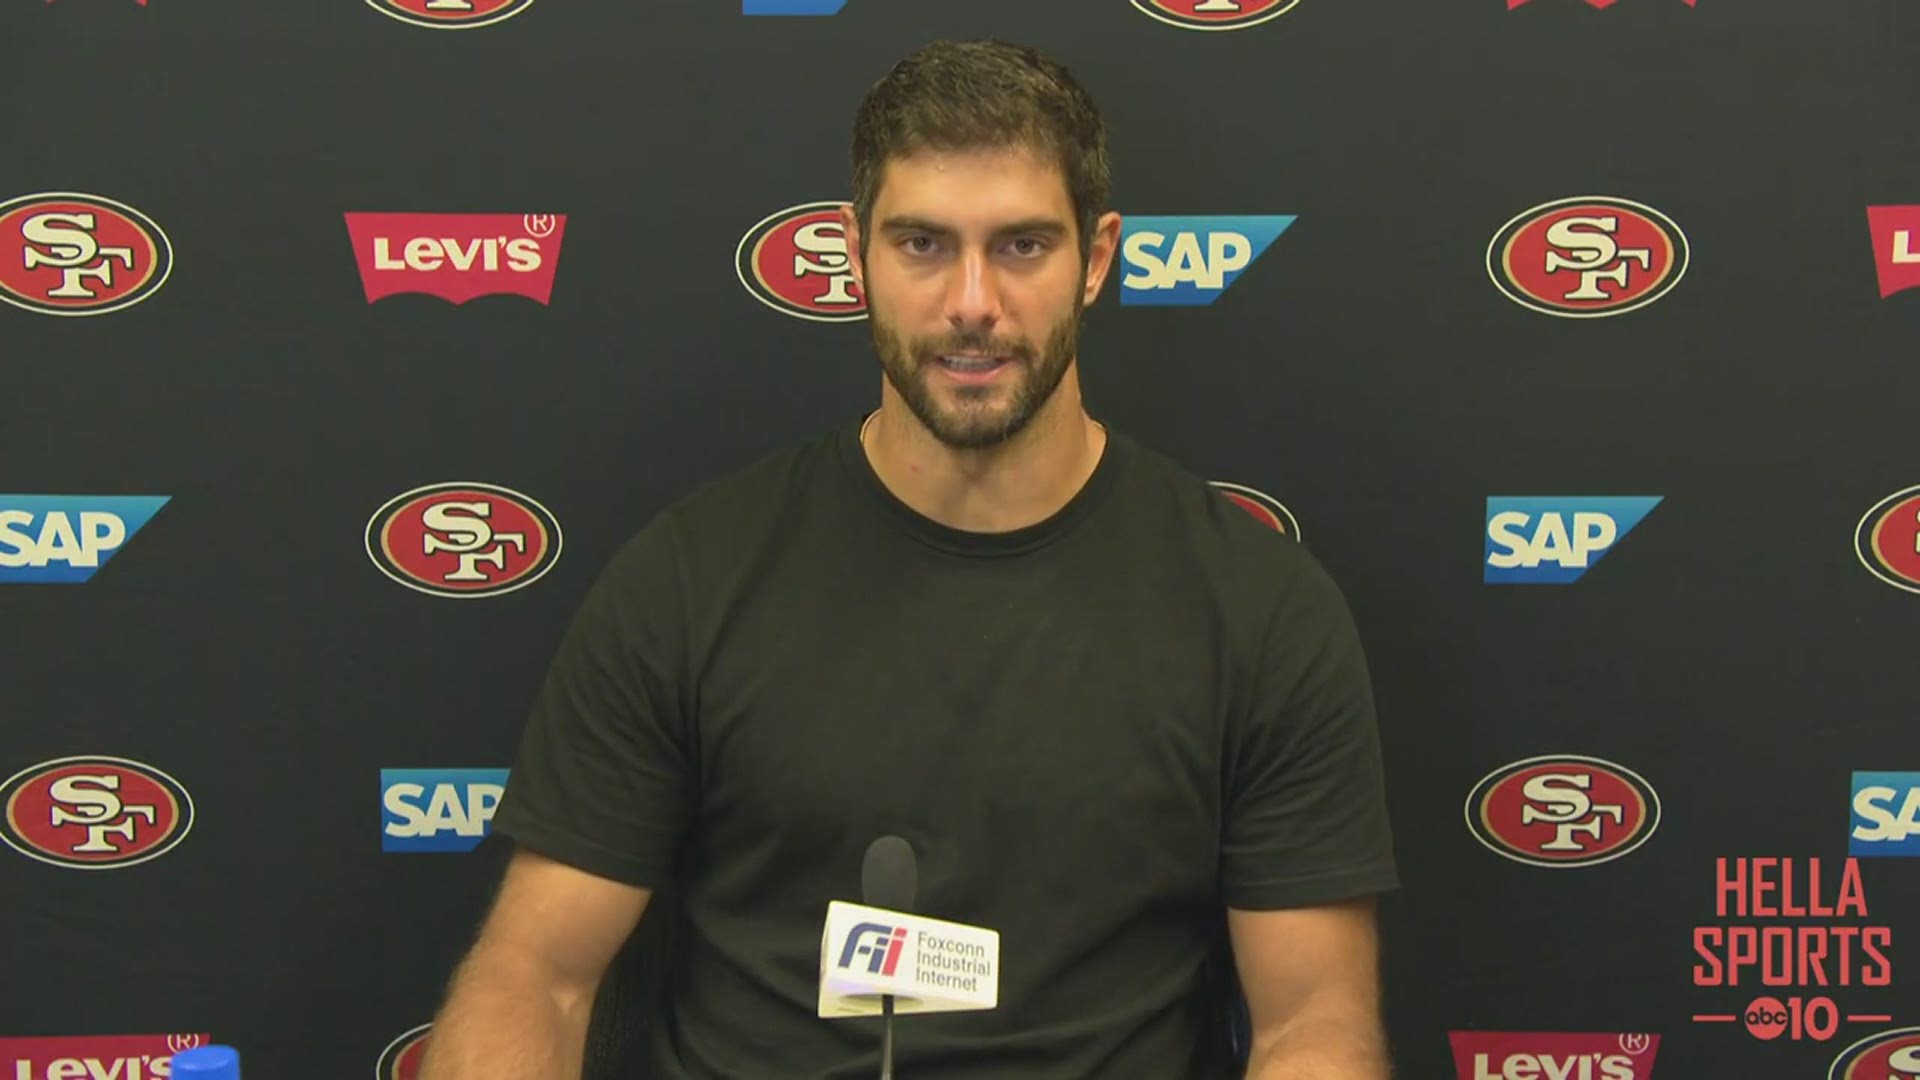 49ers QB Jimmy Garoppolo says his ankle feels better as he looks to improve from his outing last week in the loss to the Dolphins, when he faces the Rams on Sunday.